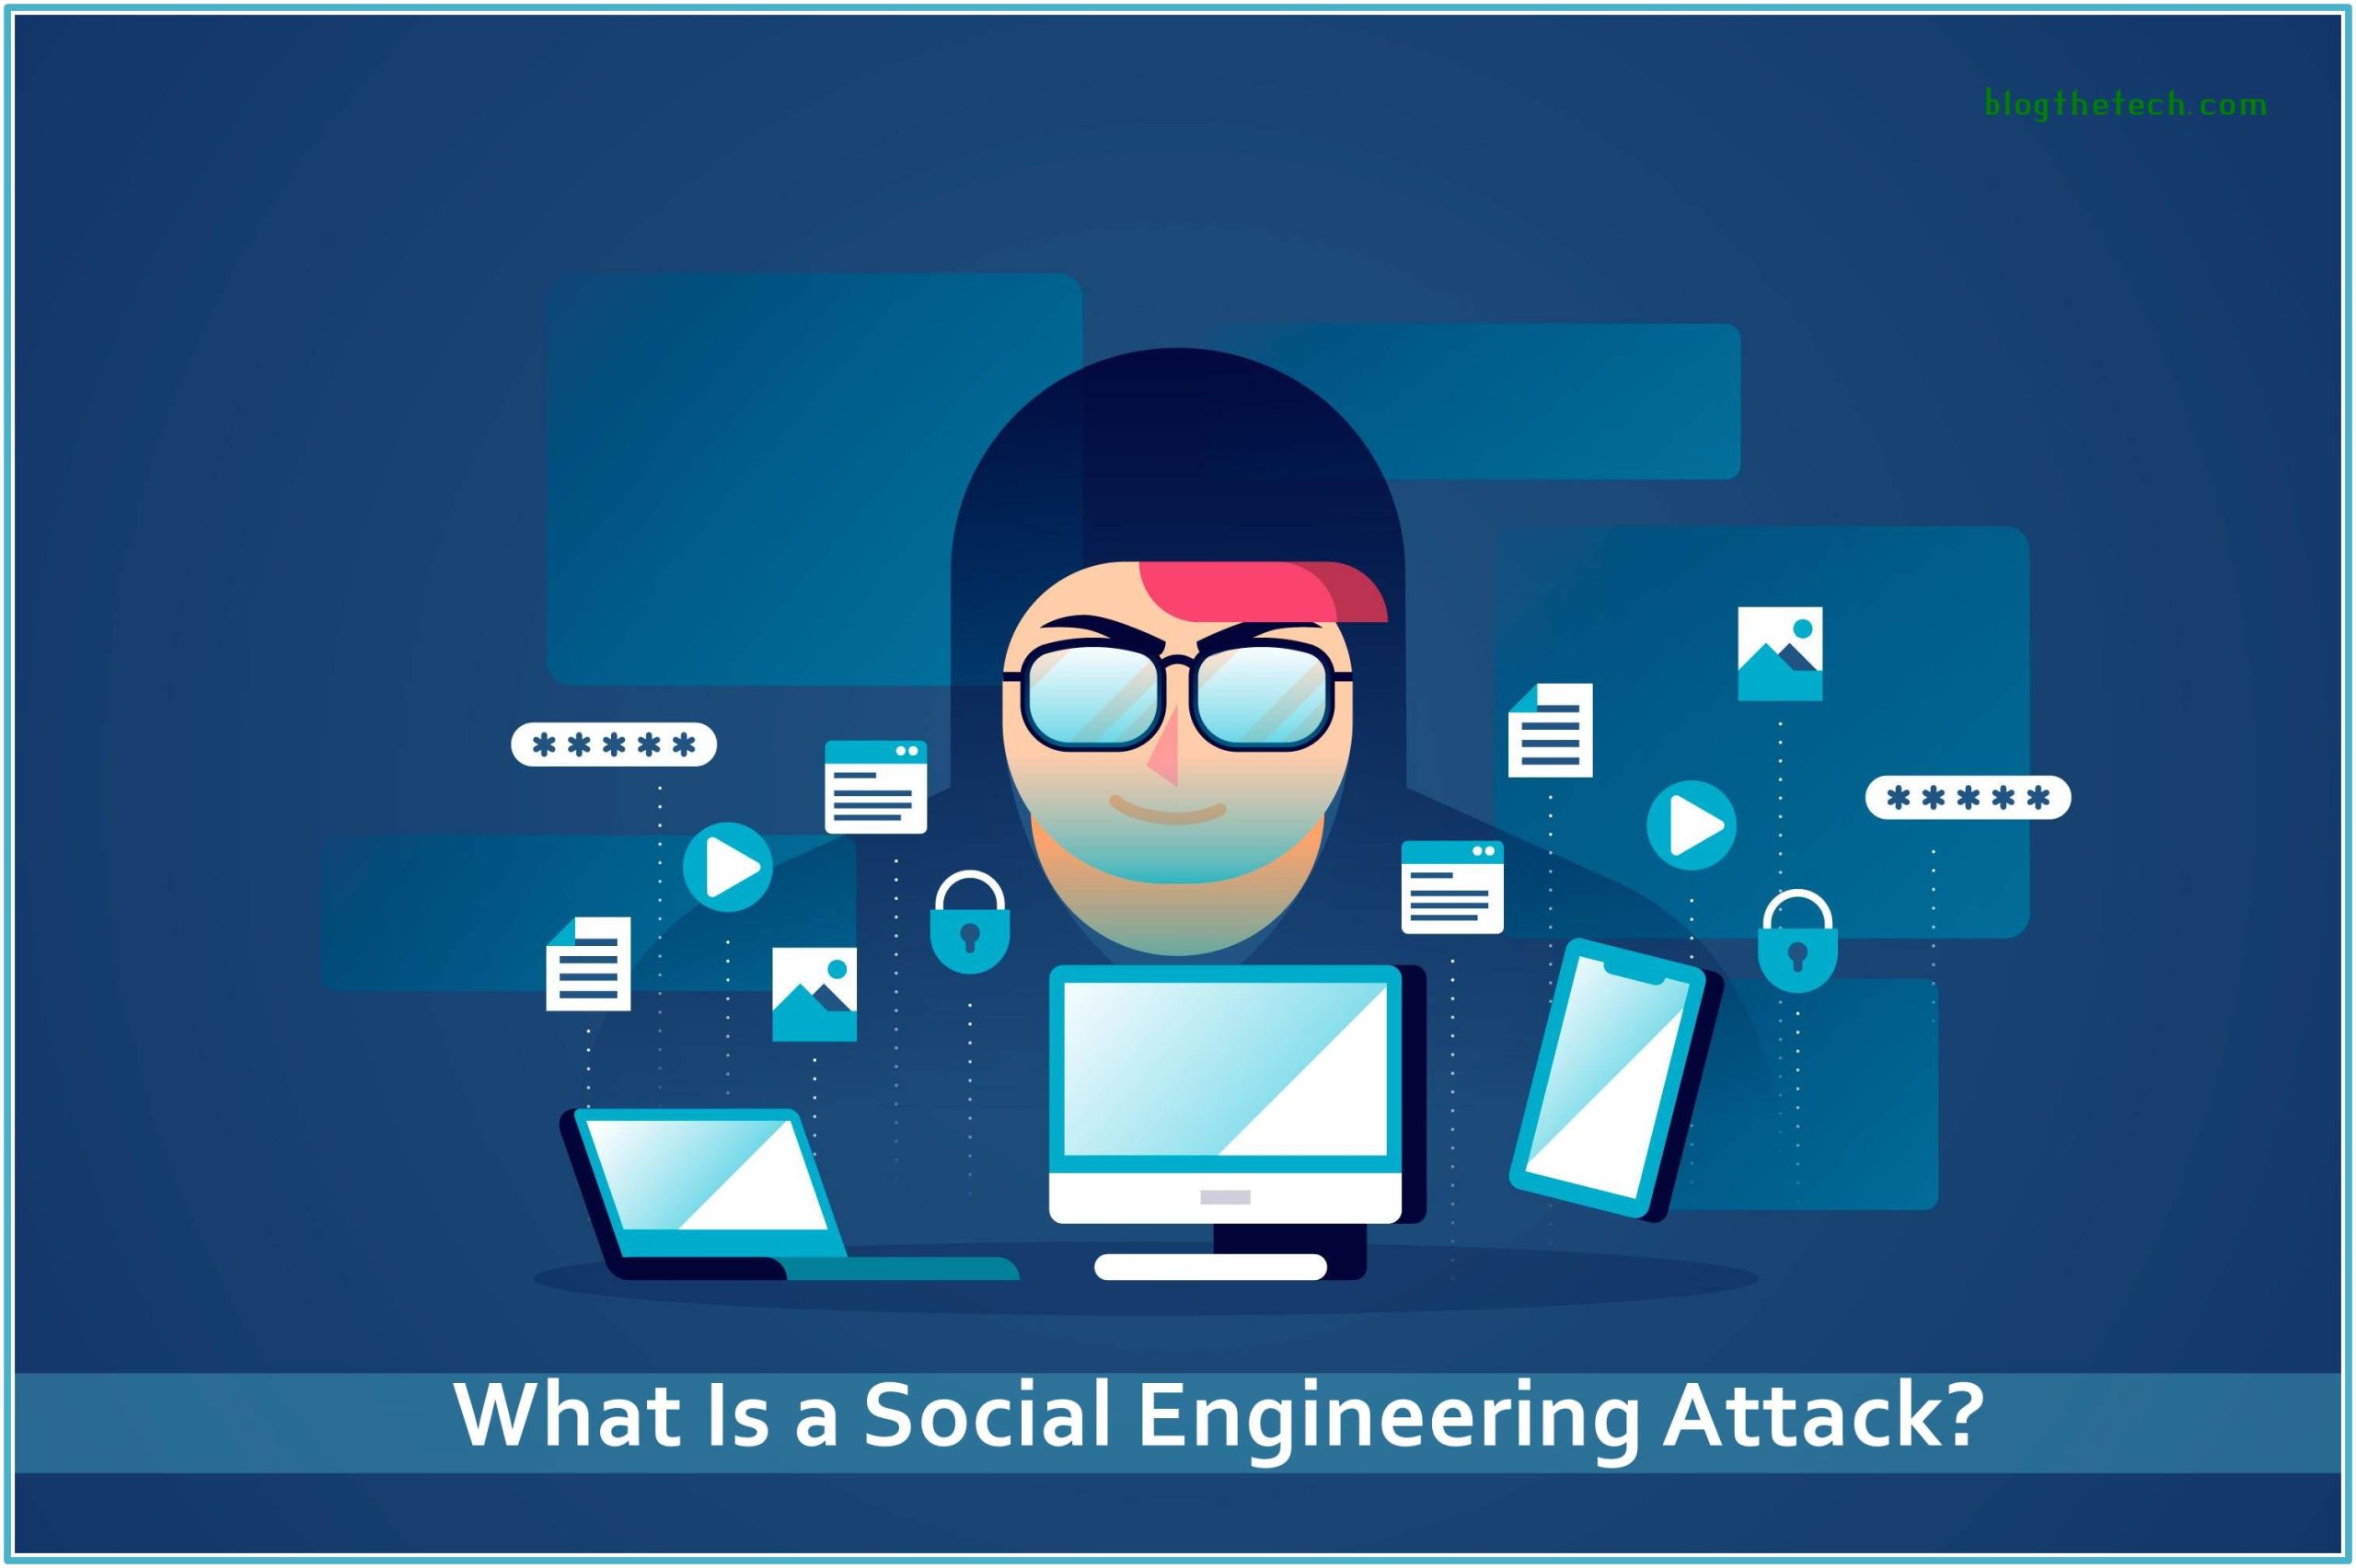 What Is a Social Engineering Attack?